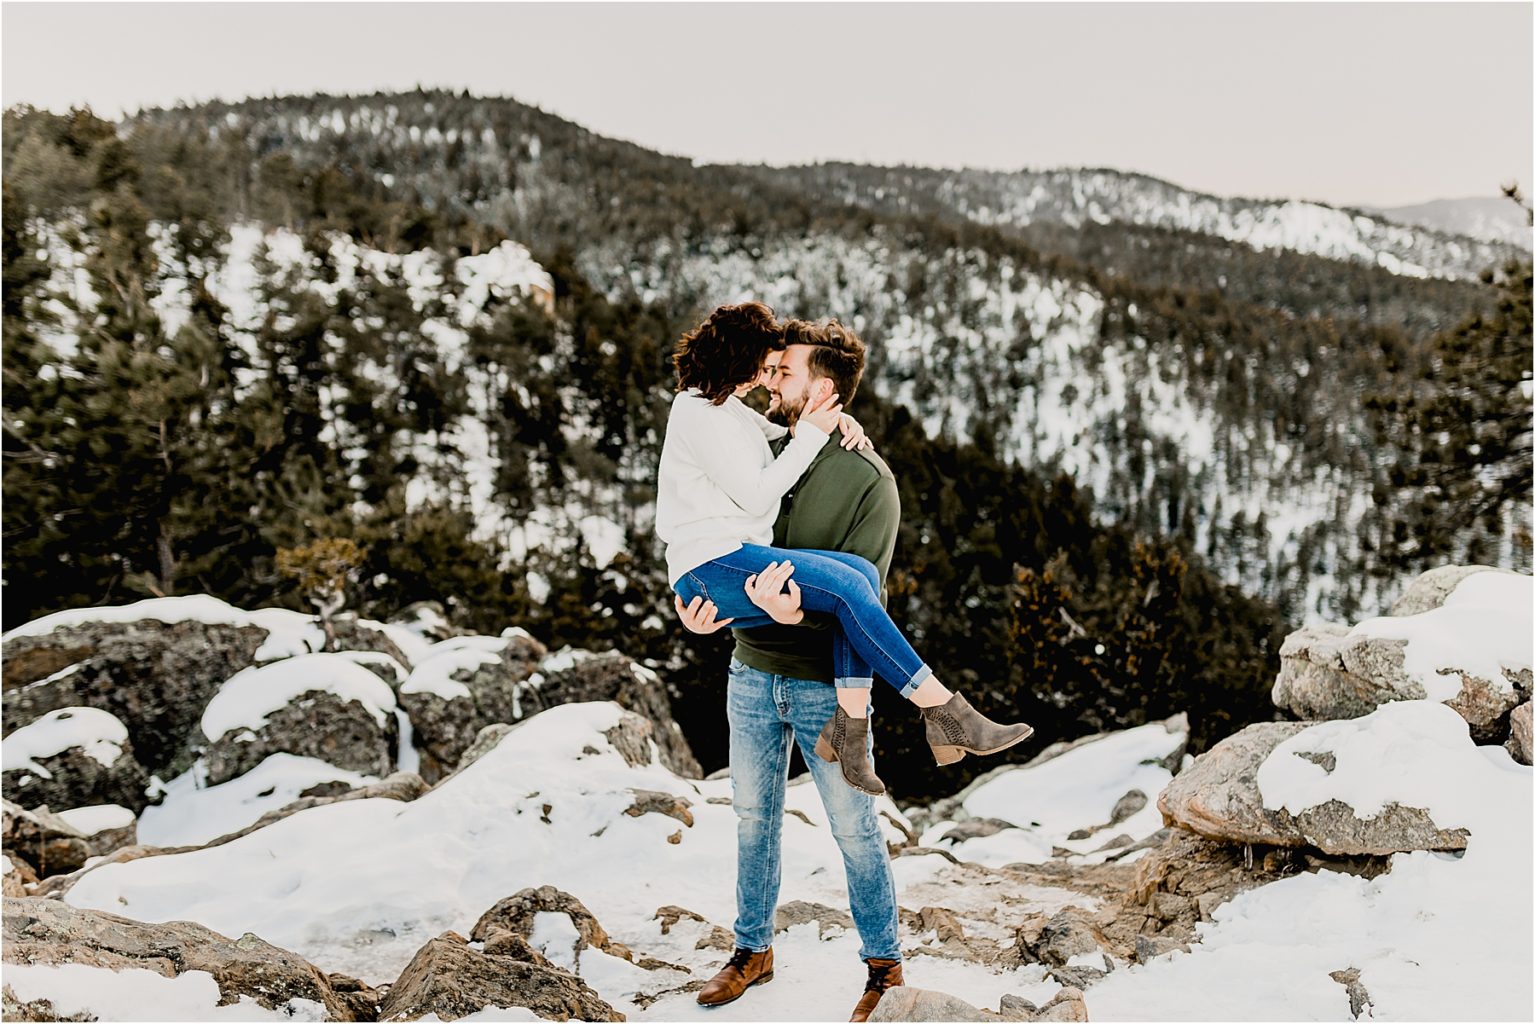 beautiful colorado engagement session in the snow covered trees and mountains